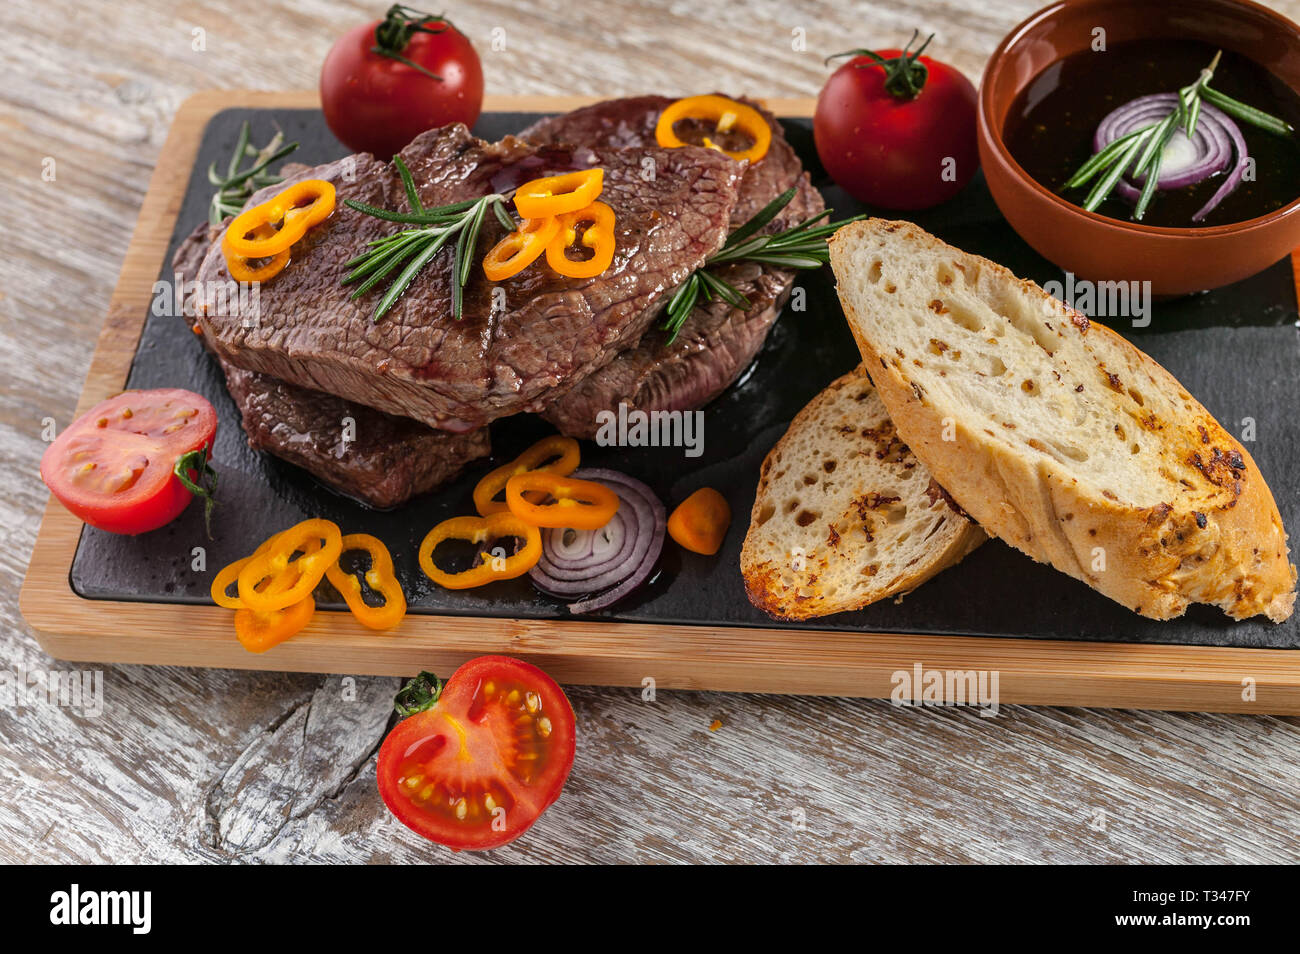 Fried Black Angus beef meat on a cutting board. Meat, spices, vegetables, croutons and rosemary Stock Photo